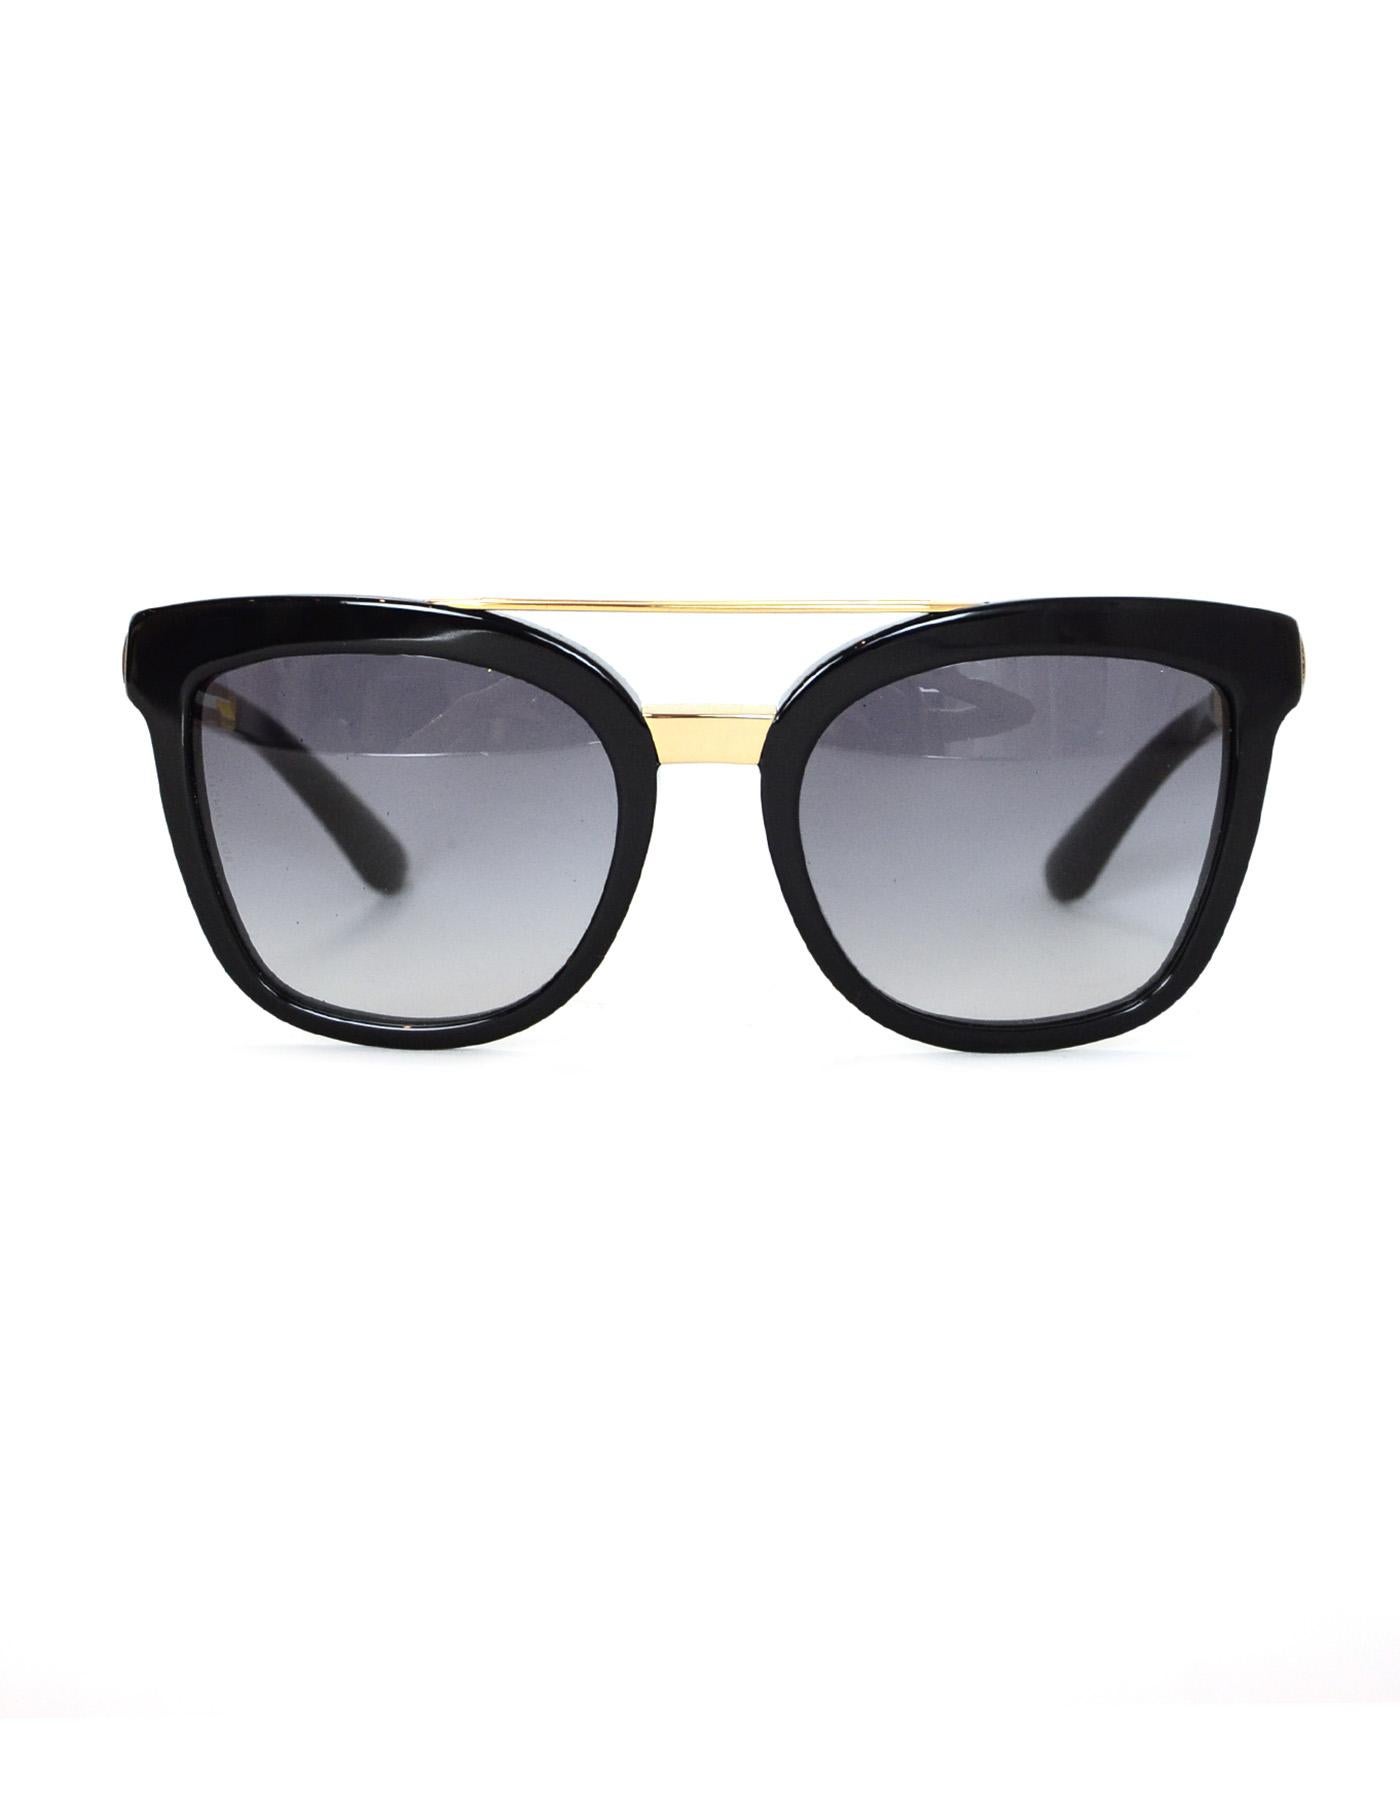 Dolce & Gabbana DG 4269 Black Resin Sunglasses w/ Top Goldtone Bar In Excellent Condition In New York, NY